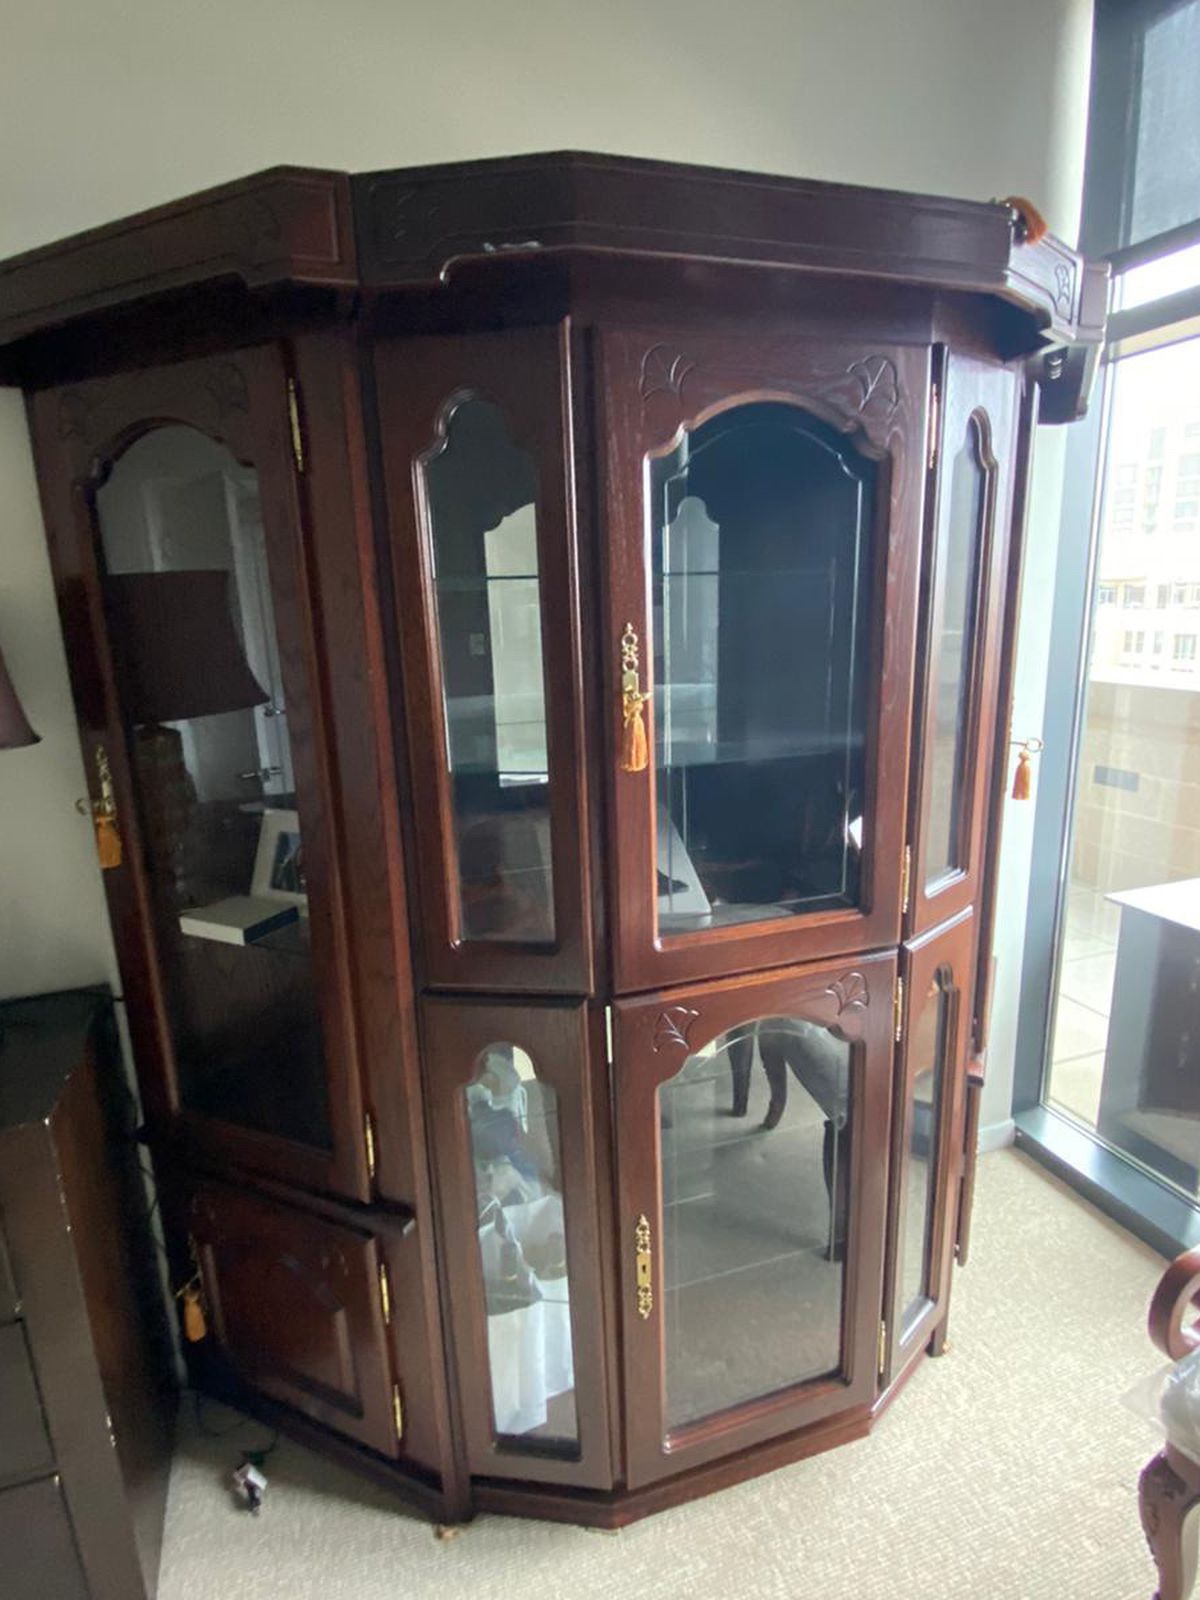 Vintage Brown Hutch, Cupboard, Cabinet. With shelves and is lighted